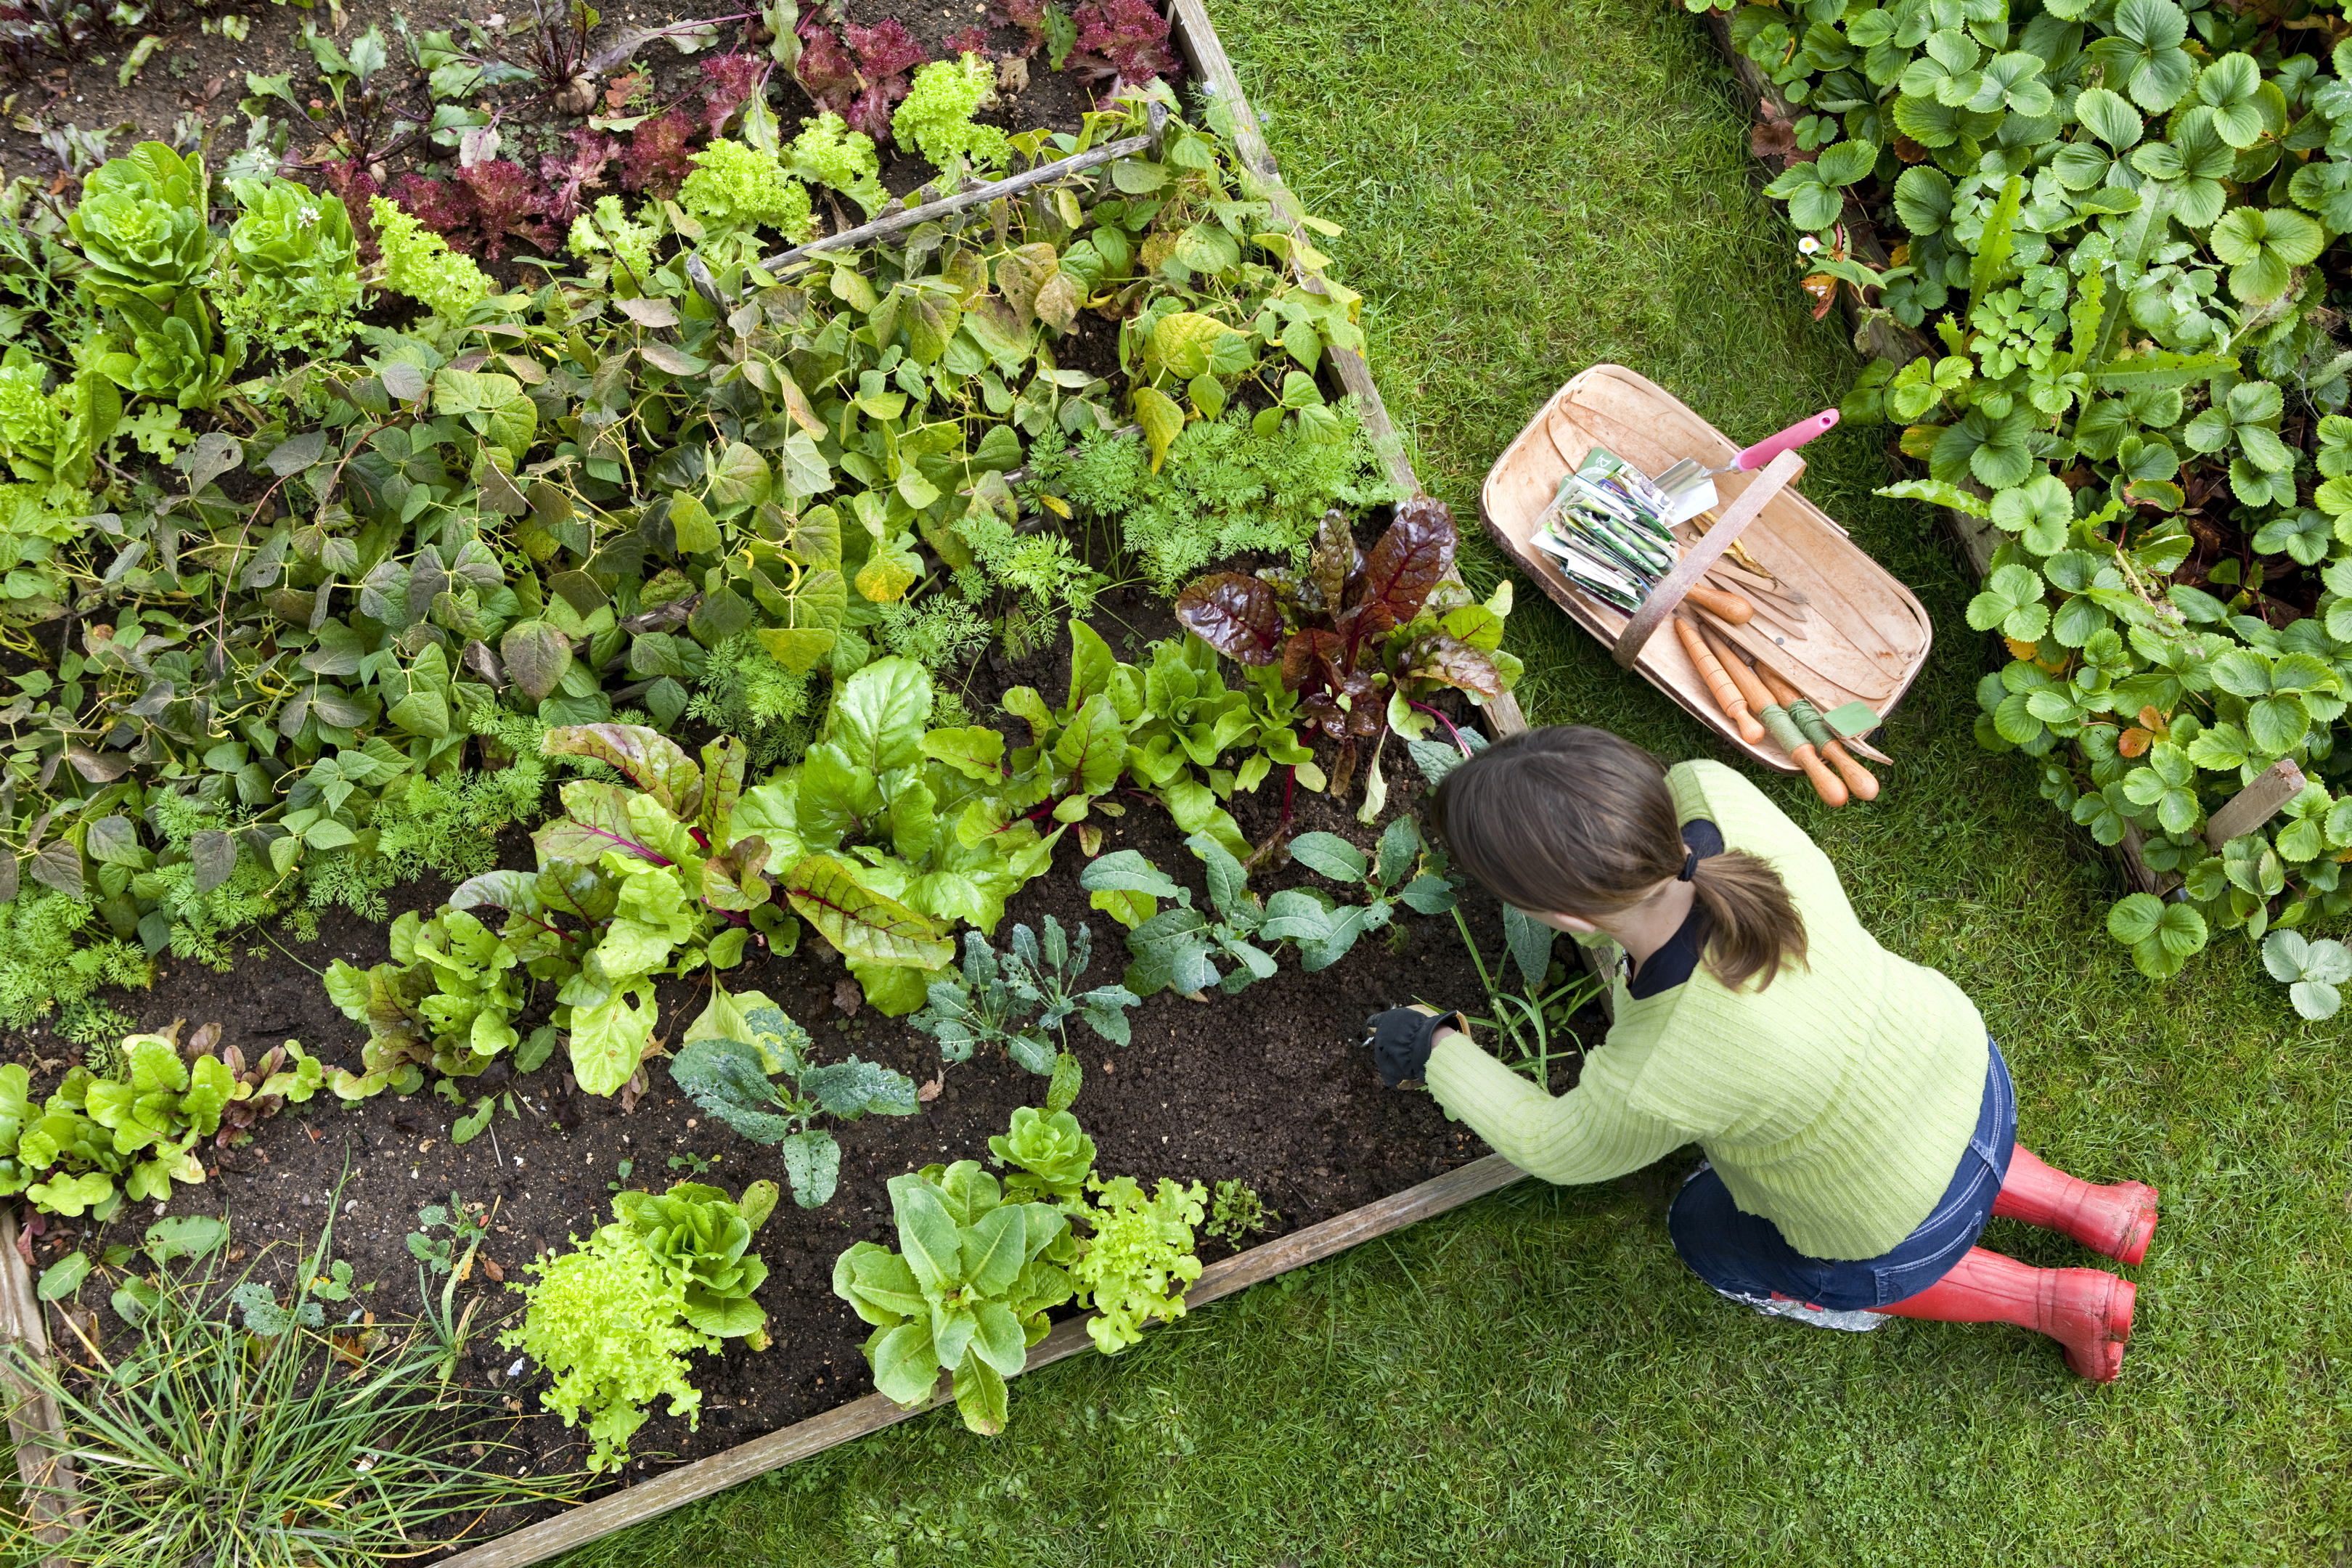 Birds eye view of a woman gardener weeding an organic vegetable garden with a hand fork, while kneeling on green grass and wearing red wellington boots.